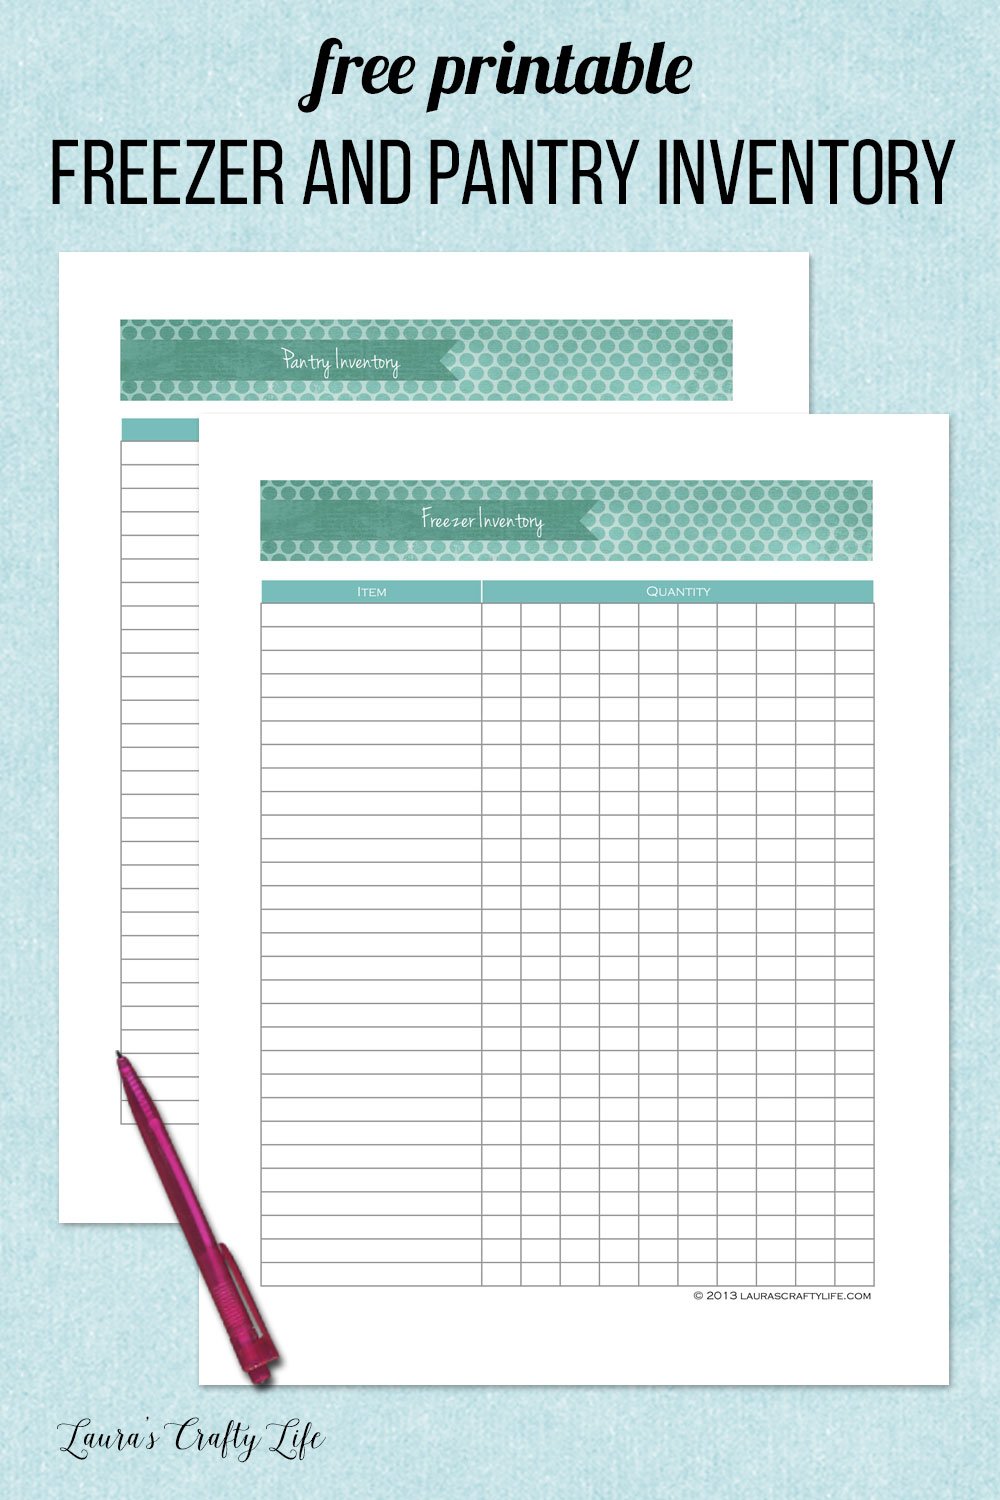 free printable freezer and pantry inventory